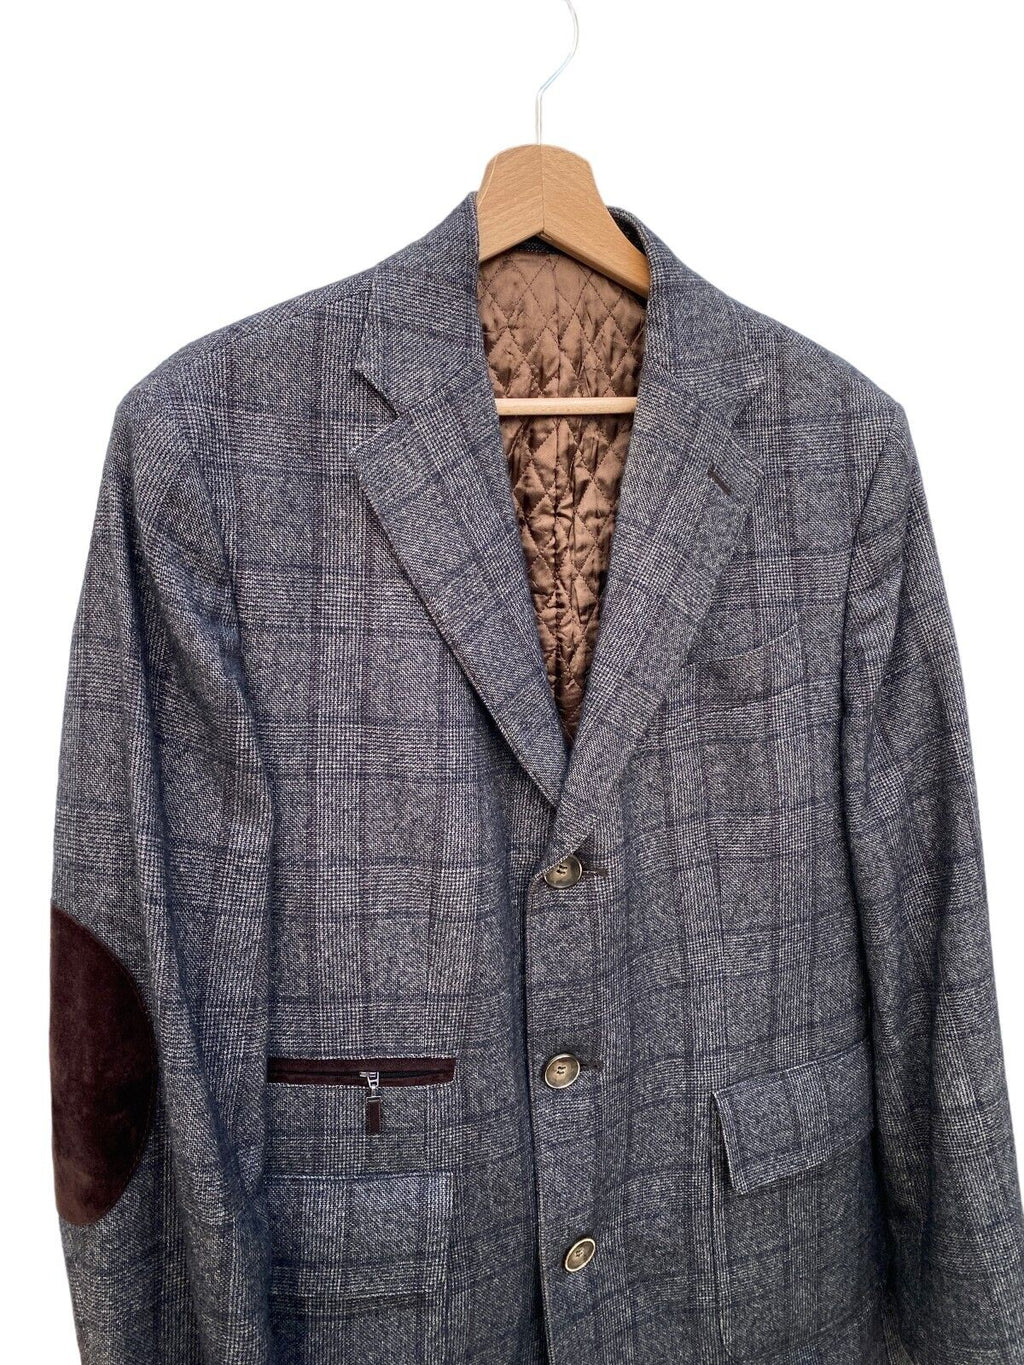 Grey Checkered Wool Coat Size 50 / M